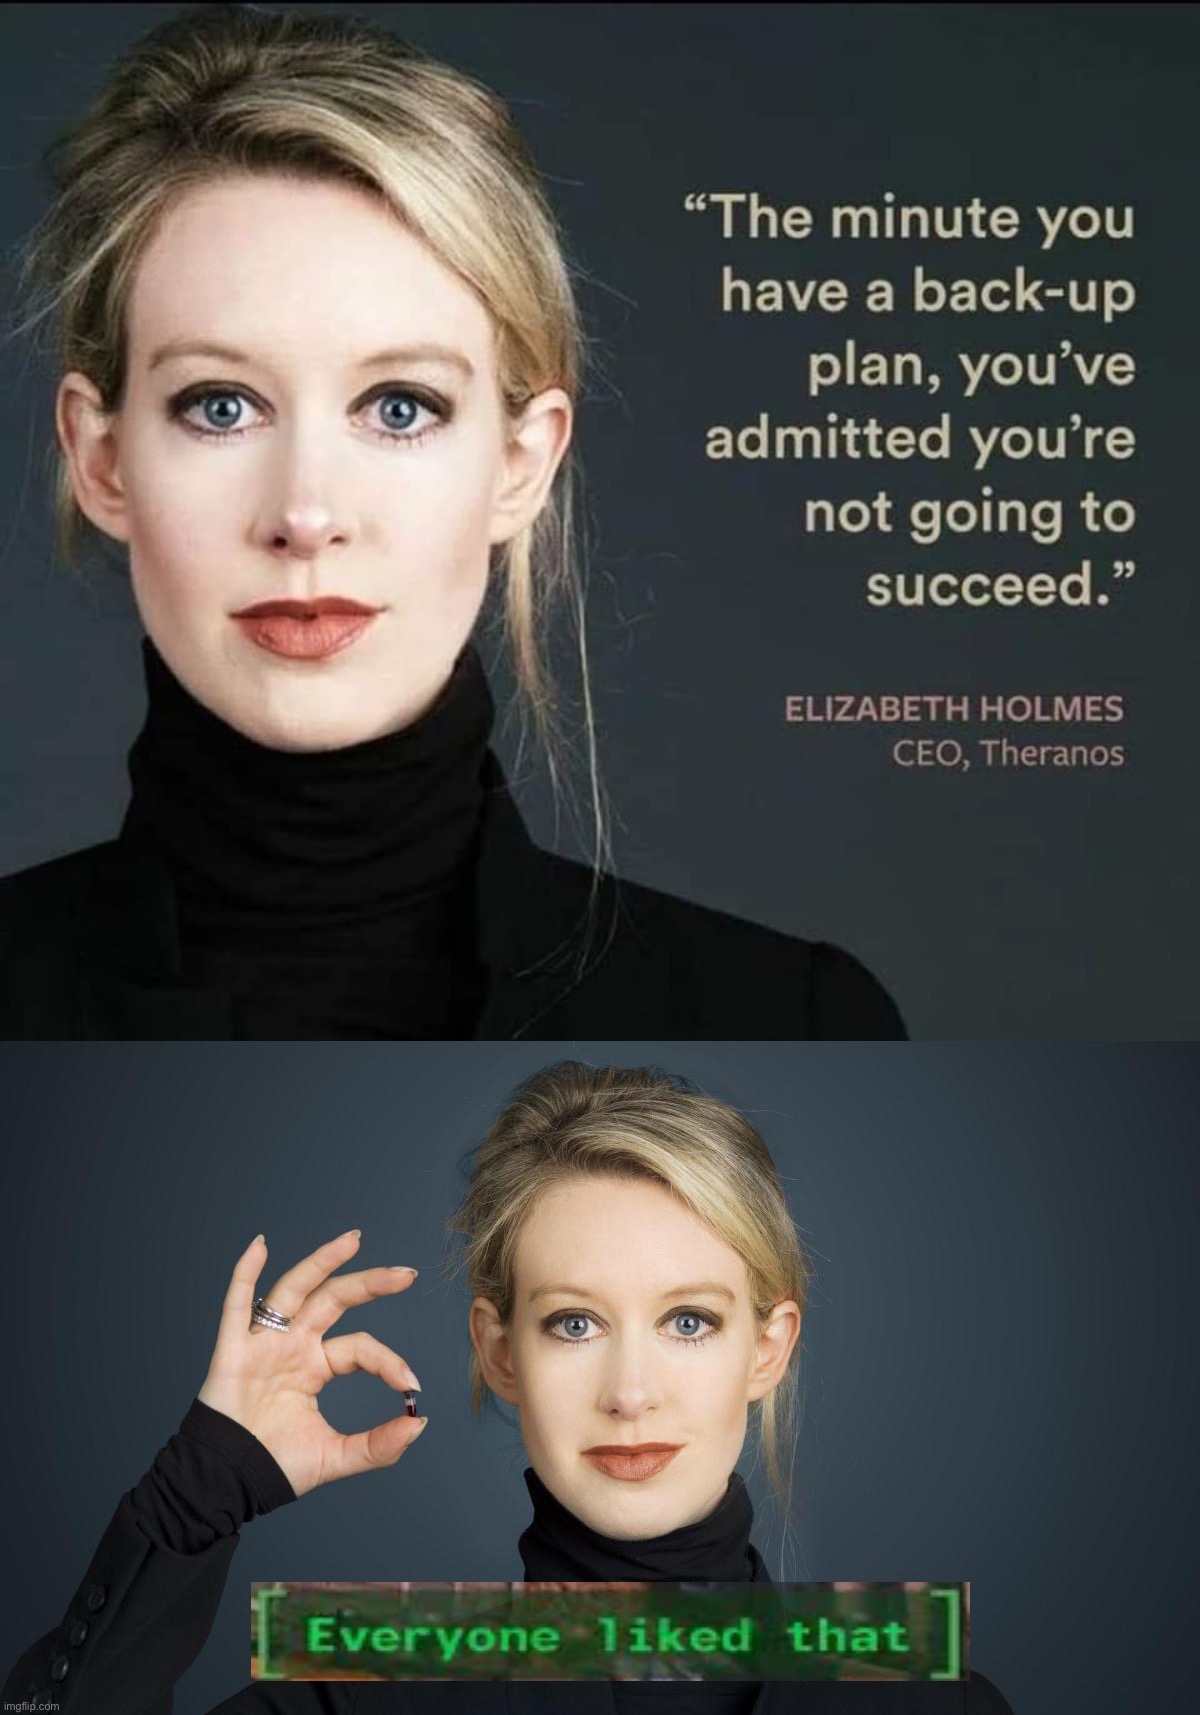 Read the quote. Now, look at the nanotainer. You’re getting sleepy. When you wake, you will invest your life savings in Theranos | image tagged in elizabeth holmes theranos quote,elizabeth holmes,theranos,hypnosis,sound investment advice,believe me | made w/ Imgflip meme maker